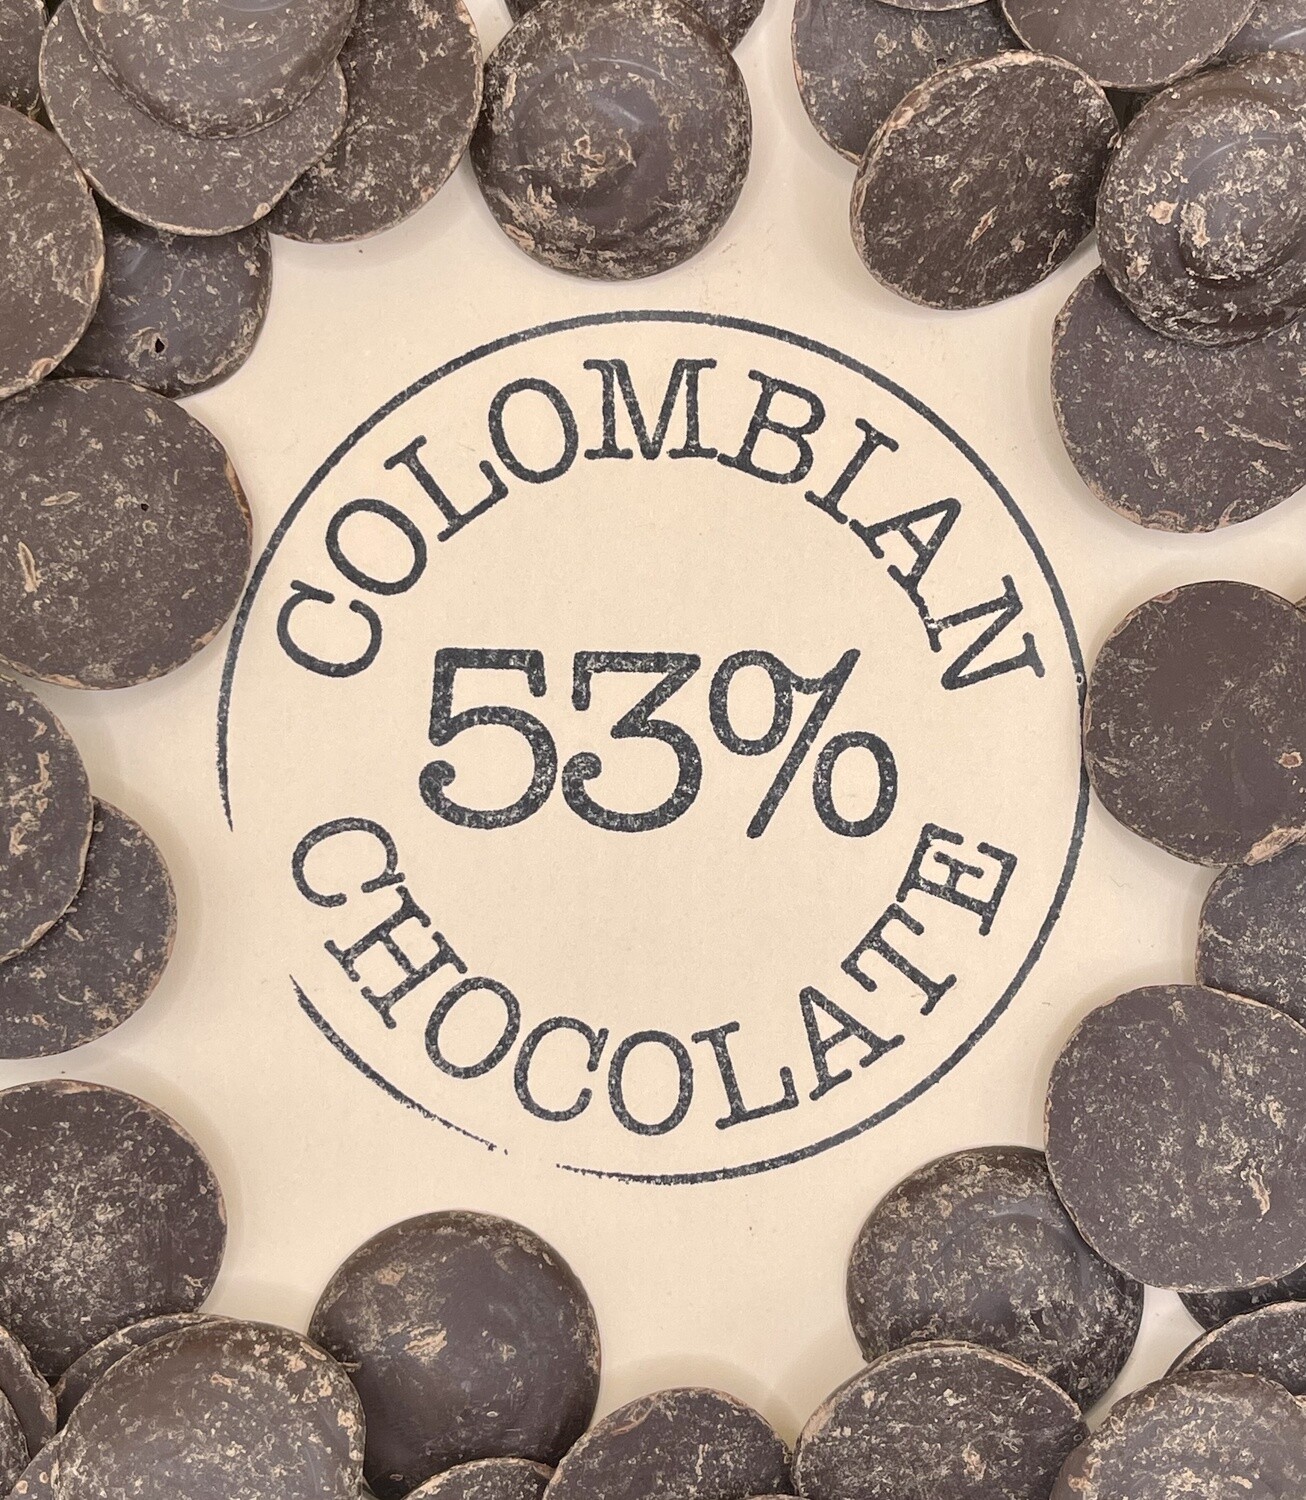 1 pound - 53% Colombian Chocolate Discs